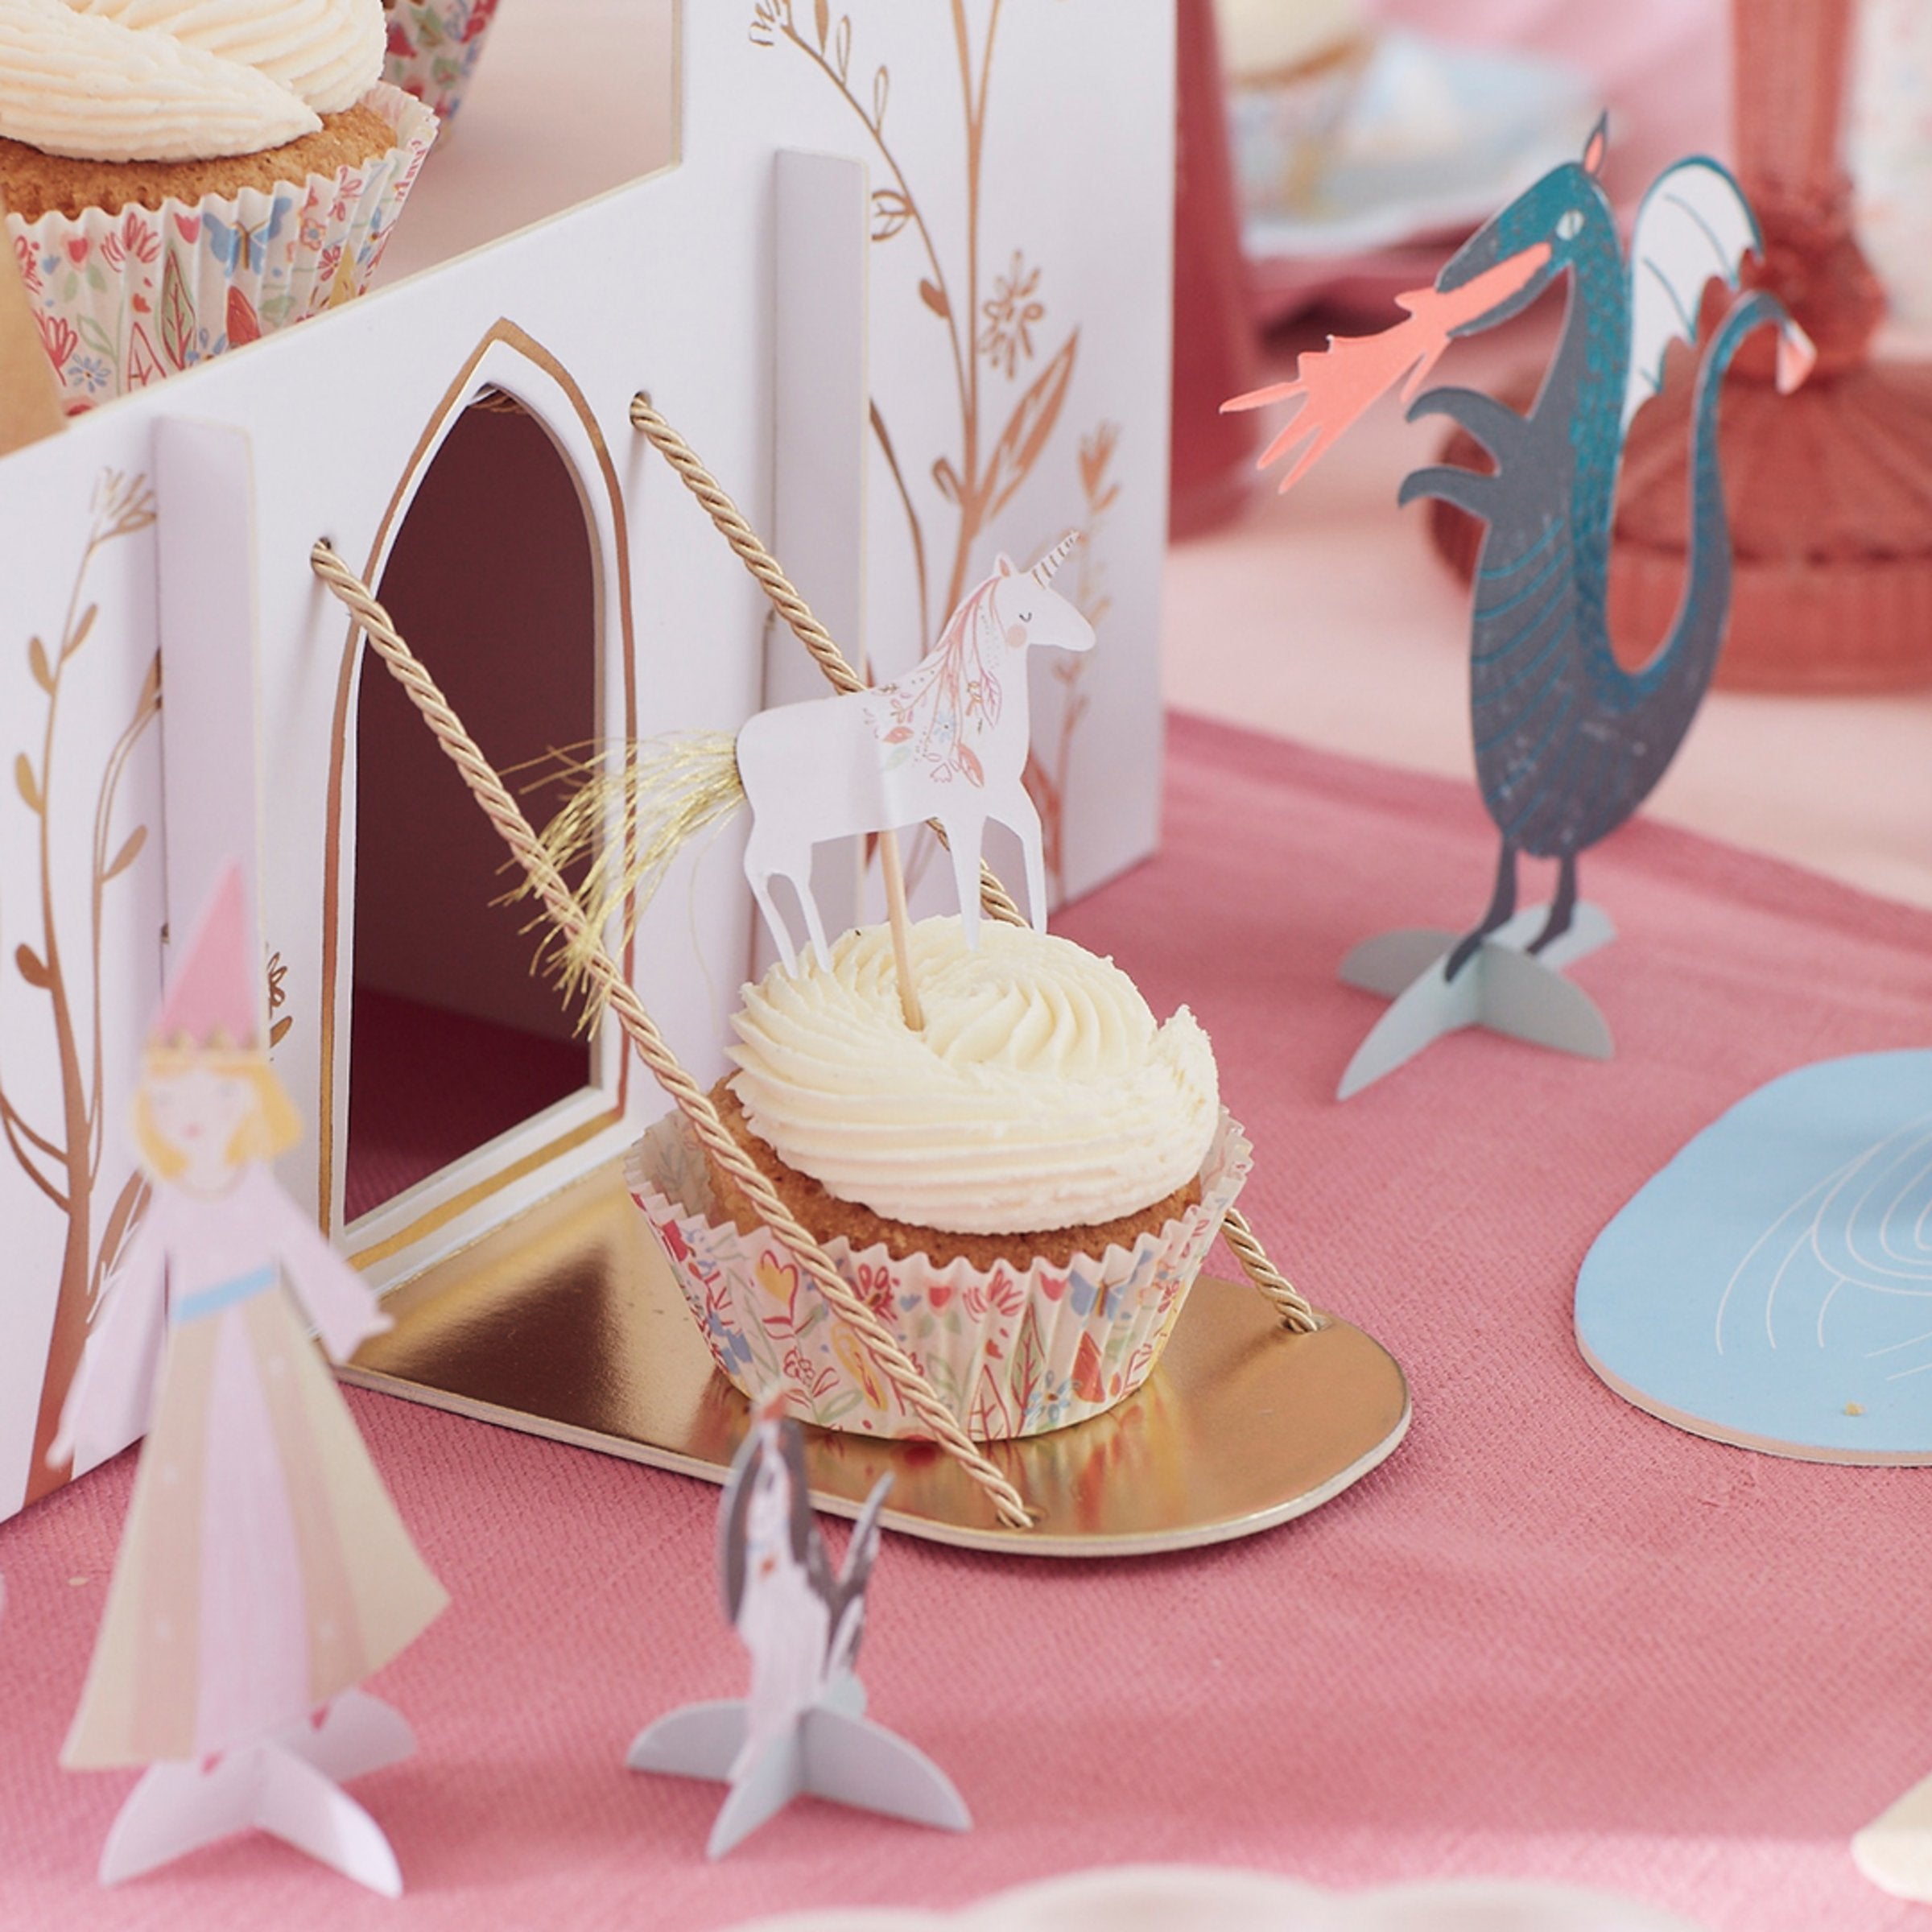 This princess cupcake kit includes carriage, flower, castle and unicorn cake toppers and coordinating cupcake cases.